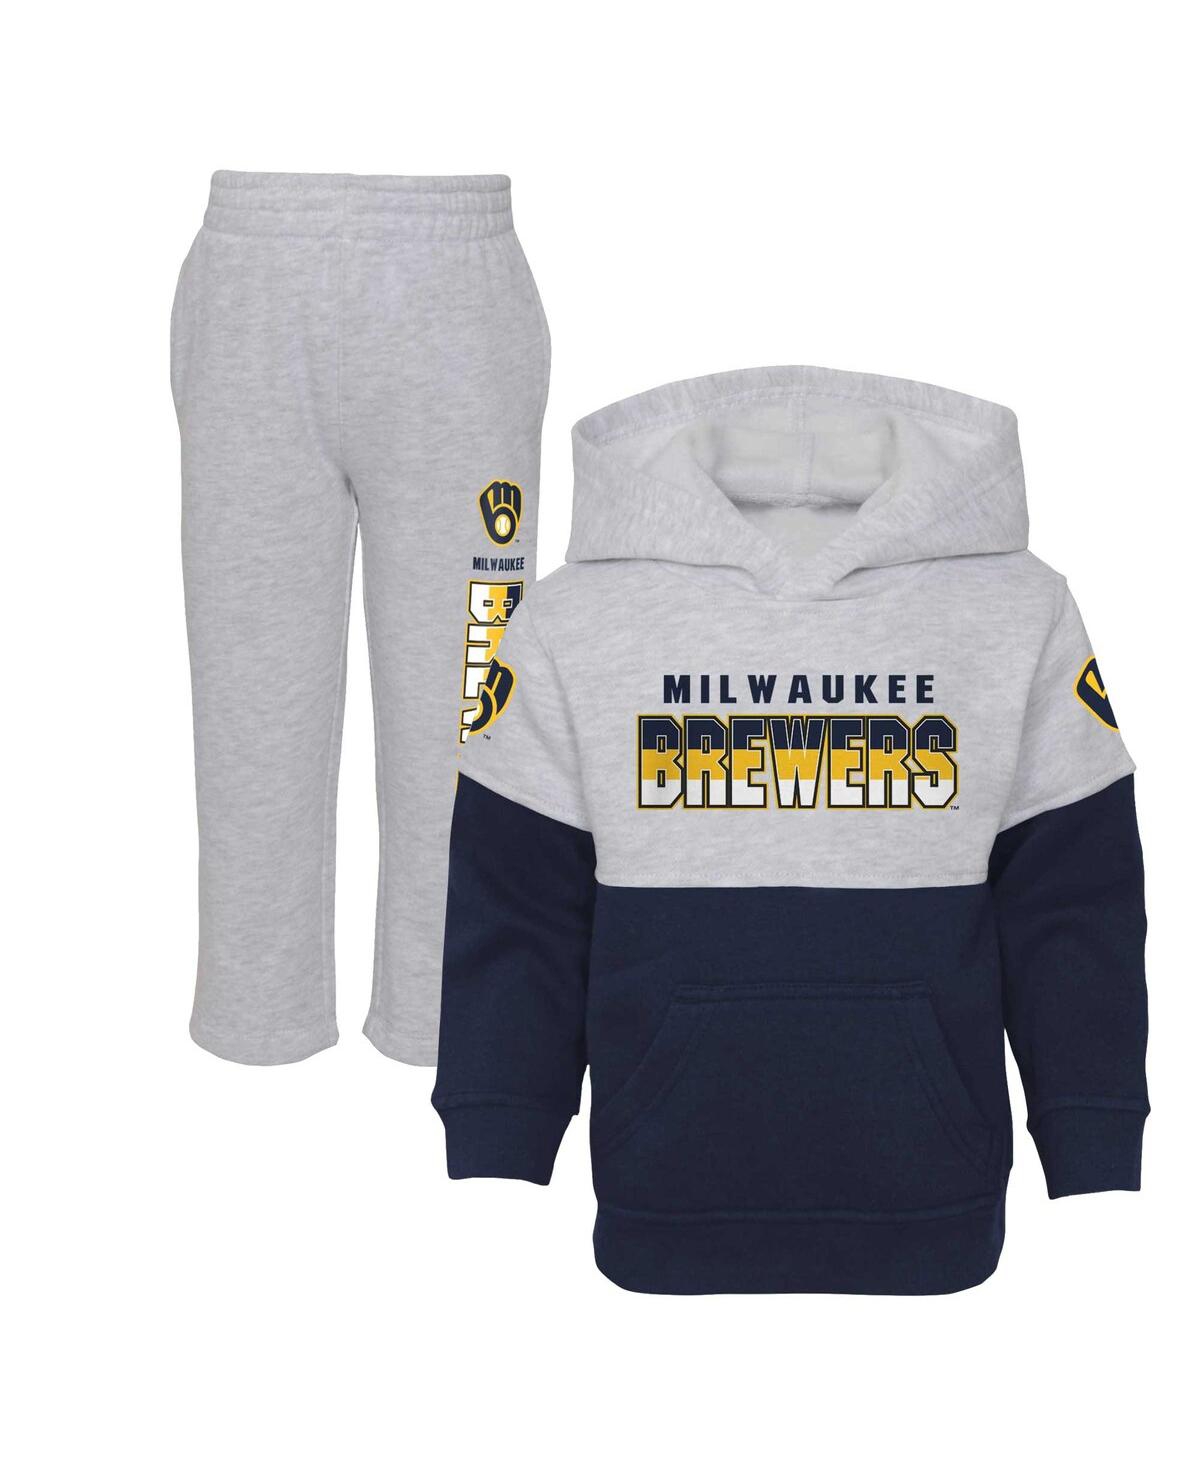 Outerstuff Babies' Toddler Boys And Girls Navy And Heather Gray Milwaukee Brewers Two-piece Playmaker Set In Navy,heather Gray